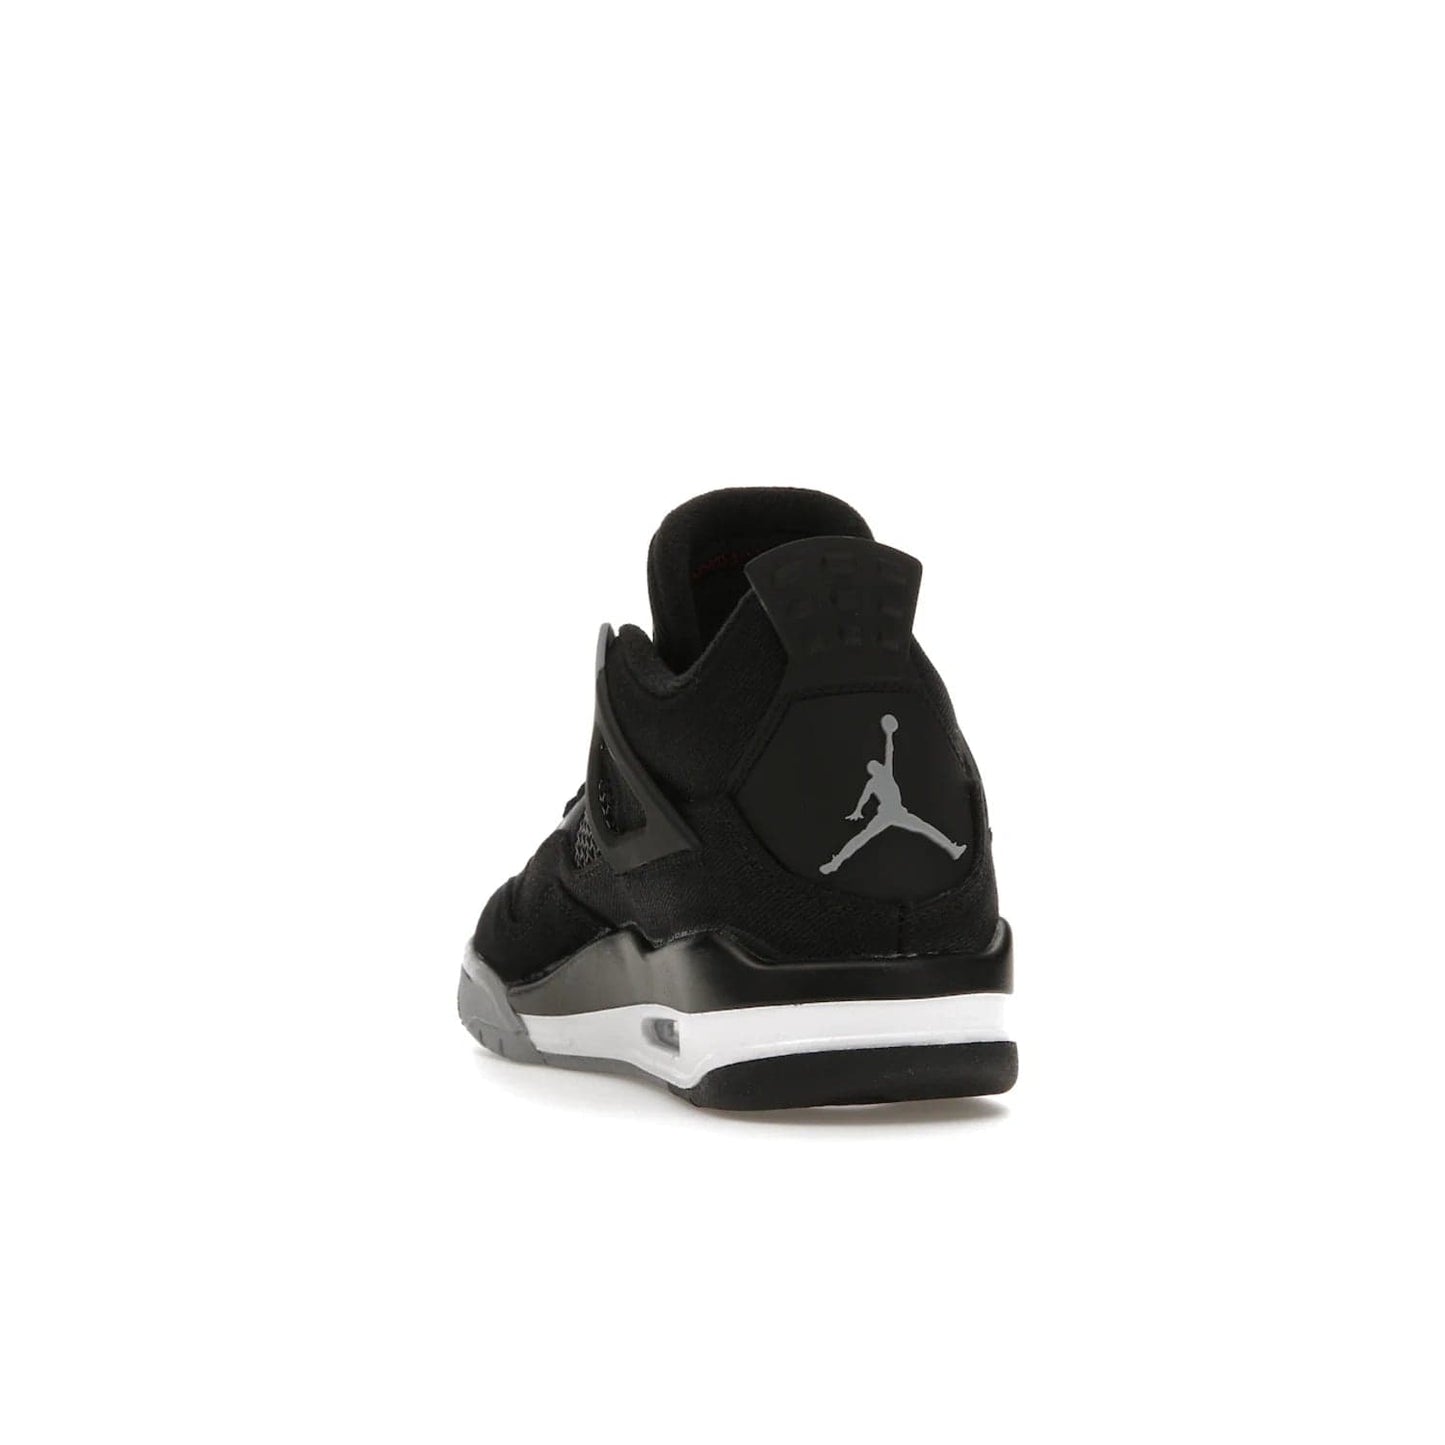 Jordan 4 Retro Black Canvas (GS) - Image 26 - Only at www.BallersClubKickz.com - Premium Air Jordan 4 Retro Black Canvas in grade-schooler's catalog. Featuring black suede canvas upper, grey molding, accents in red, white midsole, woven Jumpman tag, & visible AIR cushioning. Releasing Oct. 1, 2022.